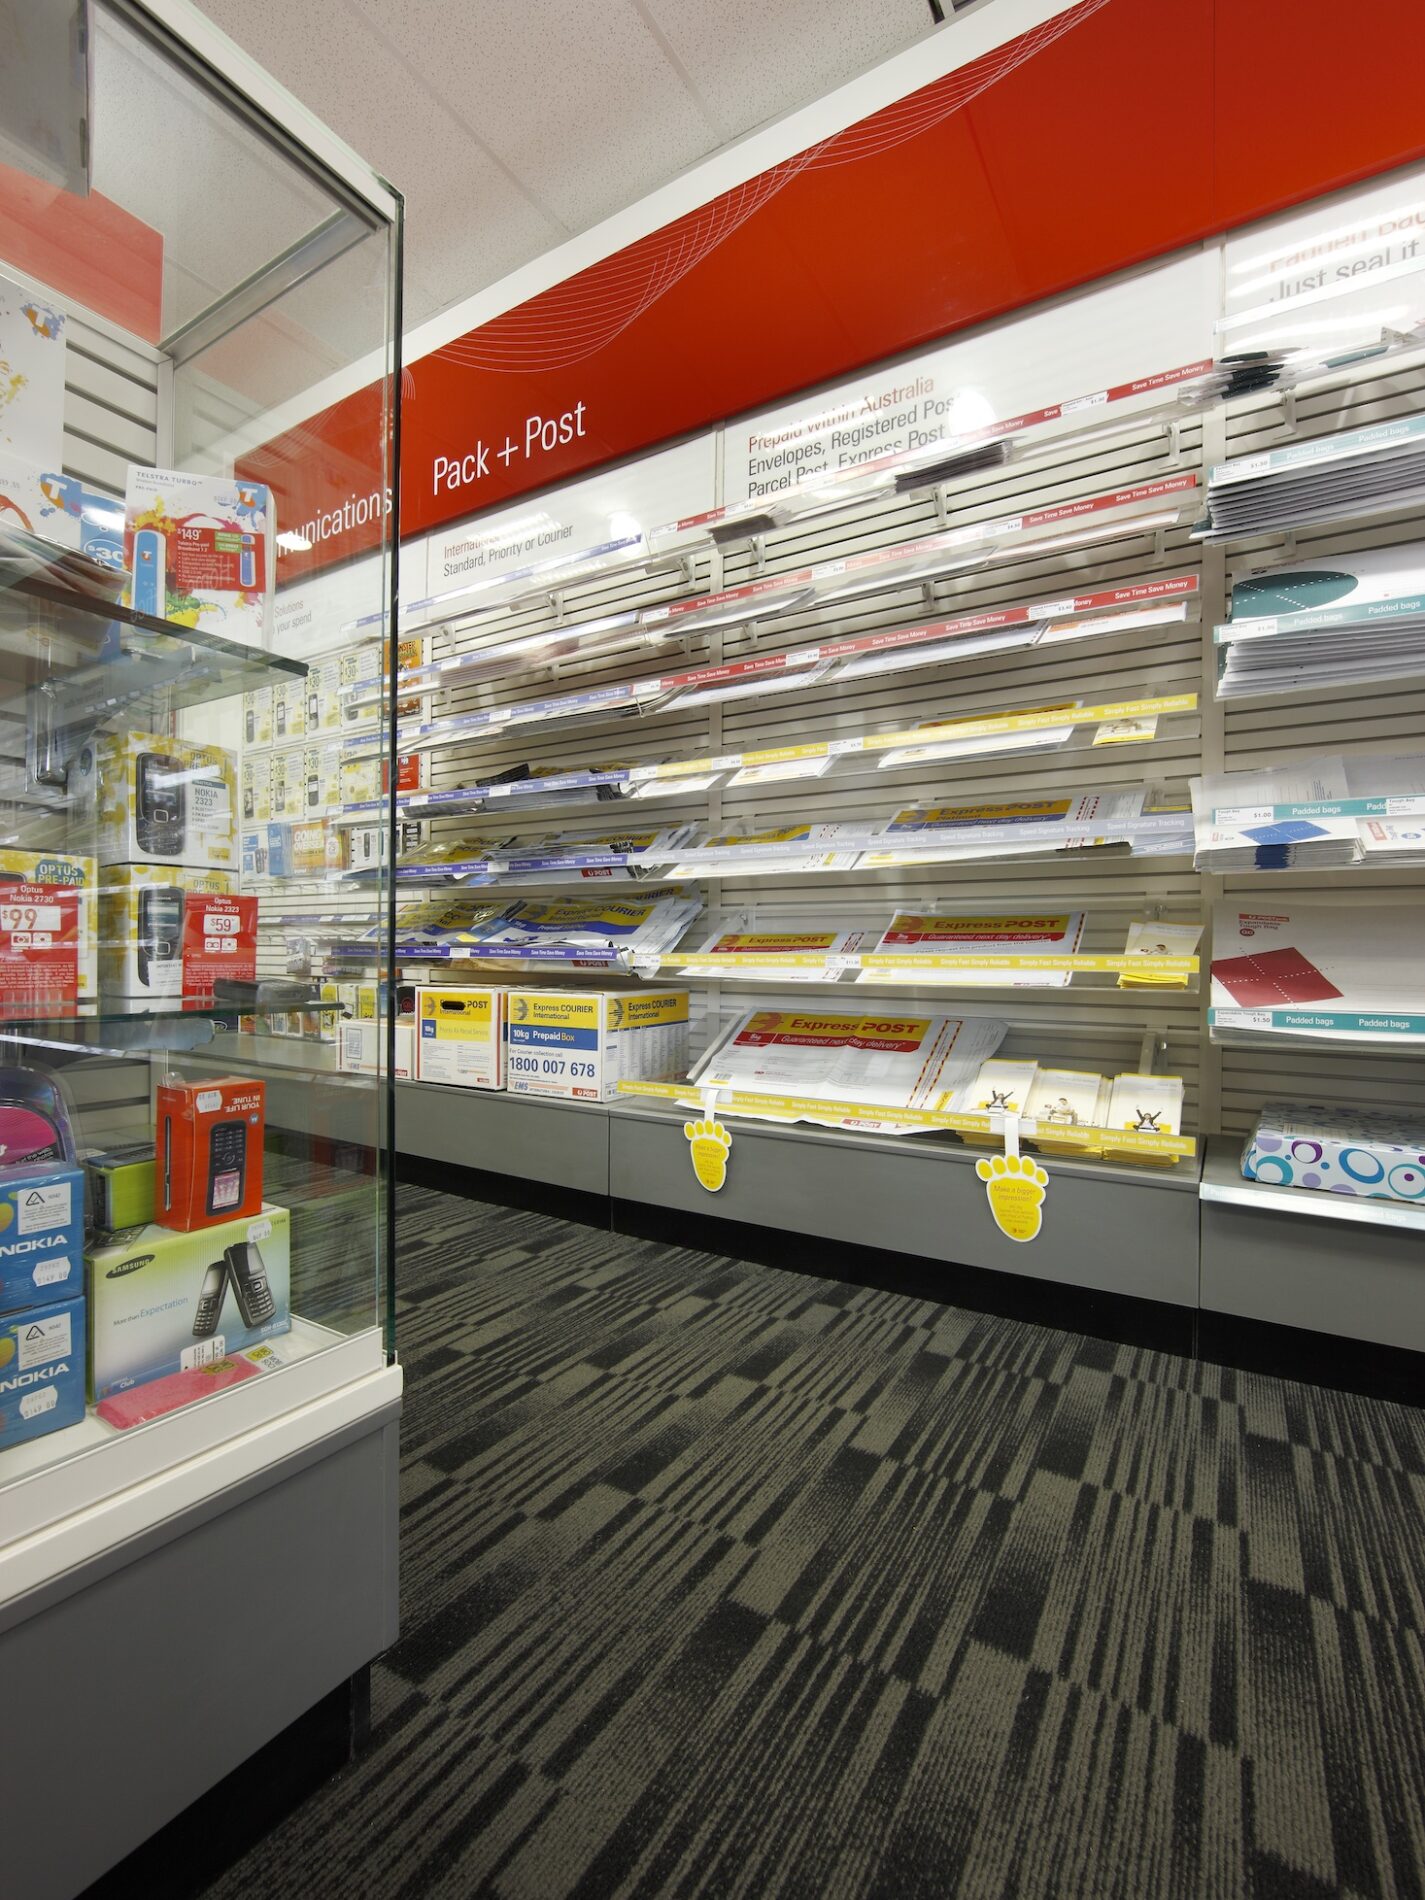 Australia Post shop with pack and post shelving and glass display cabinet